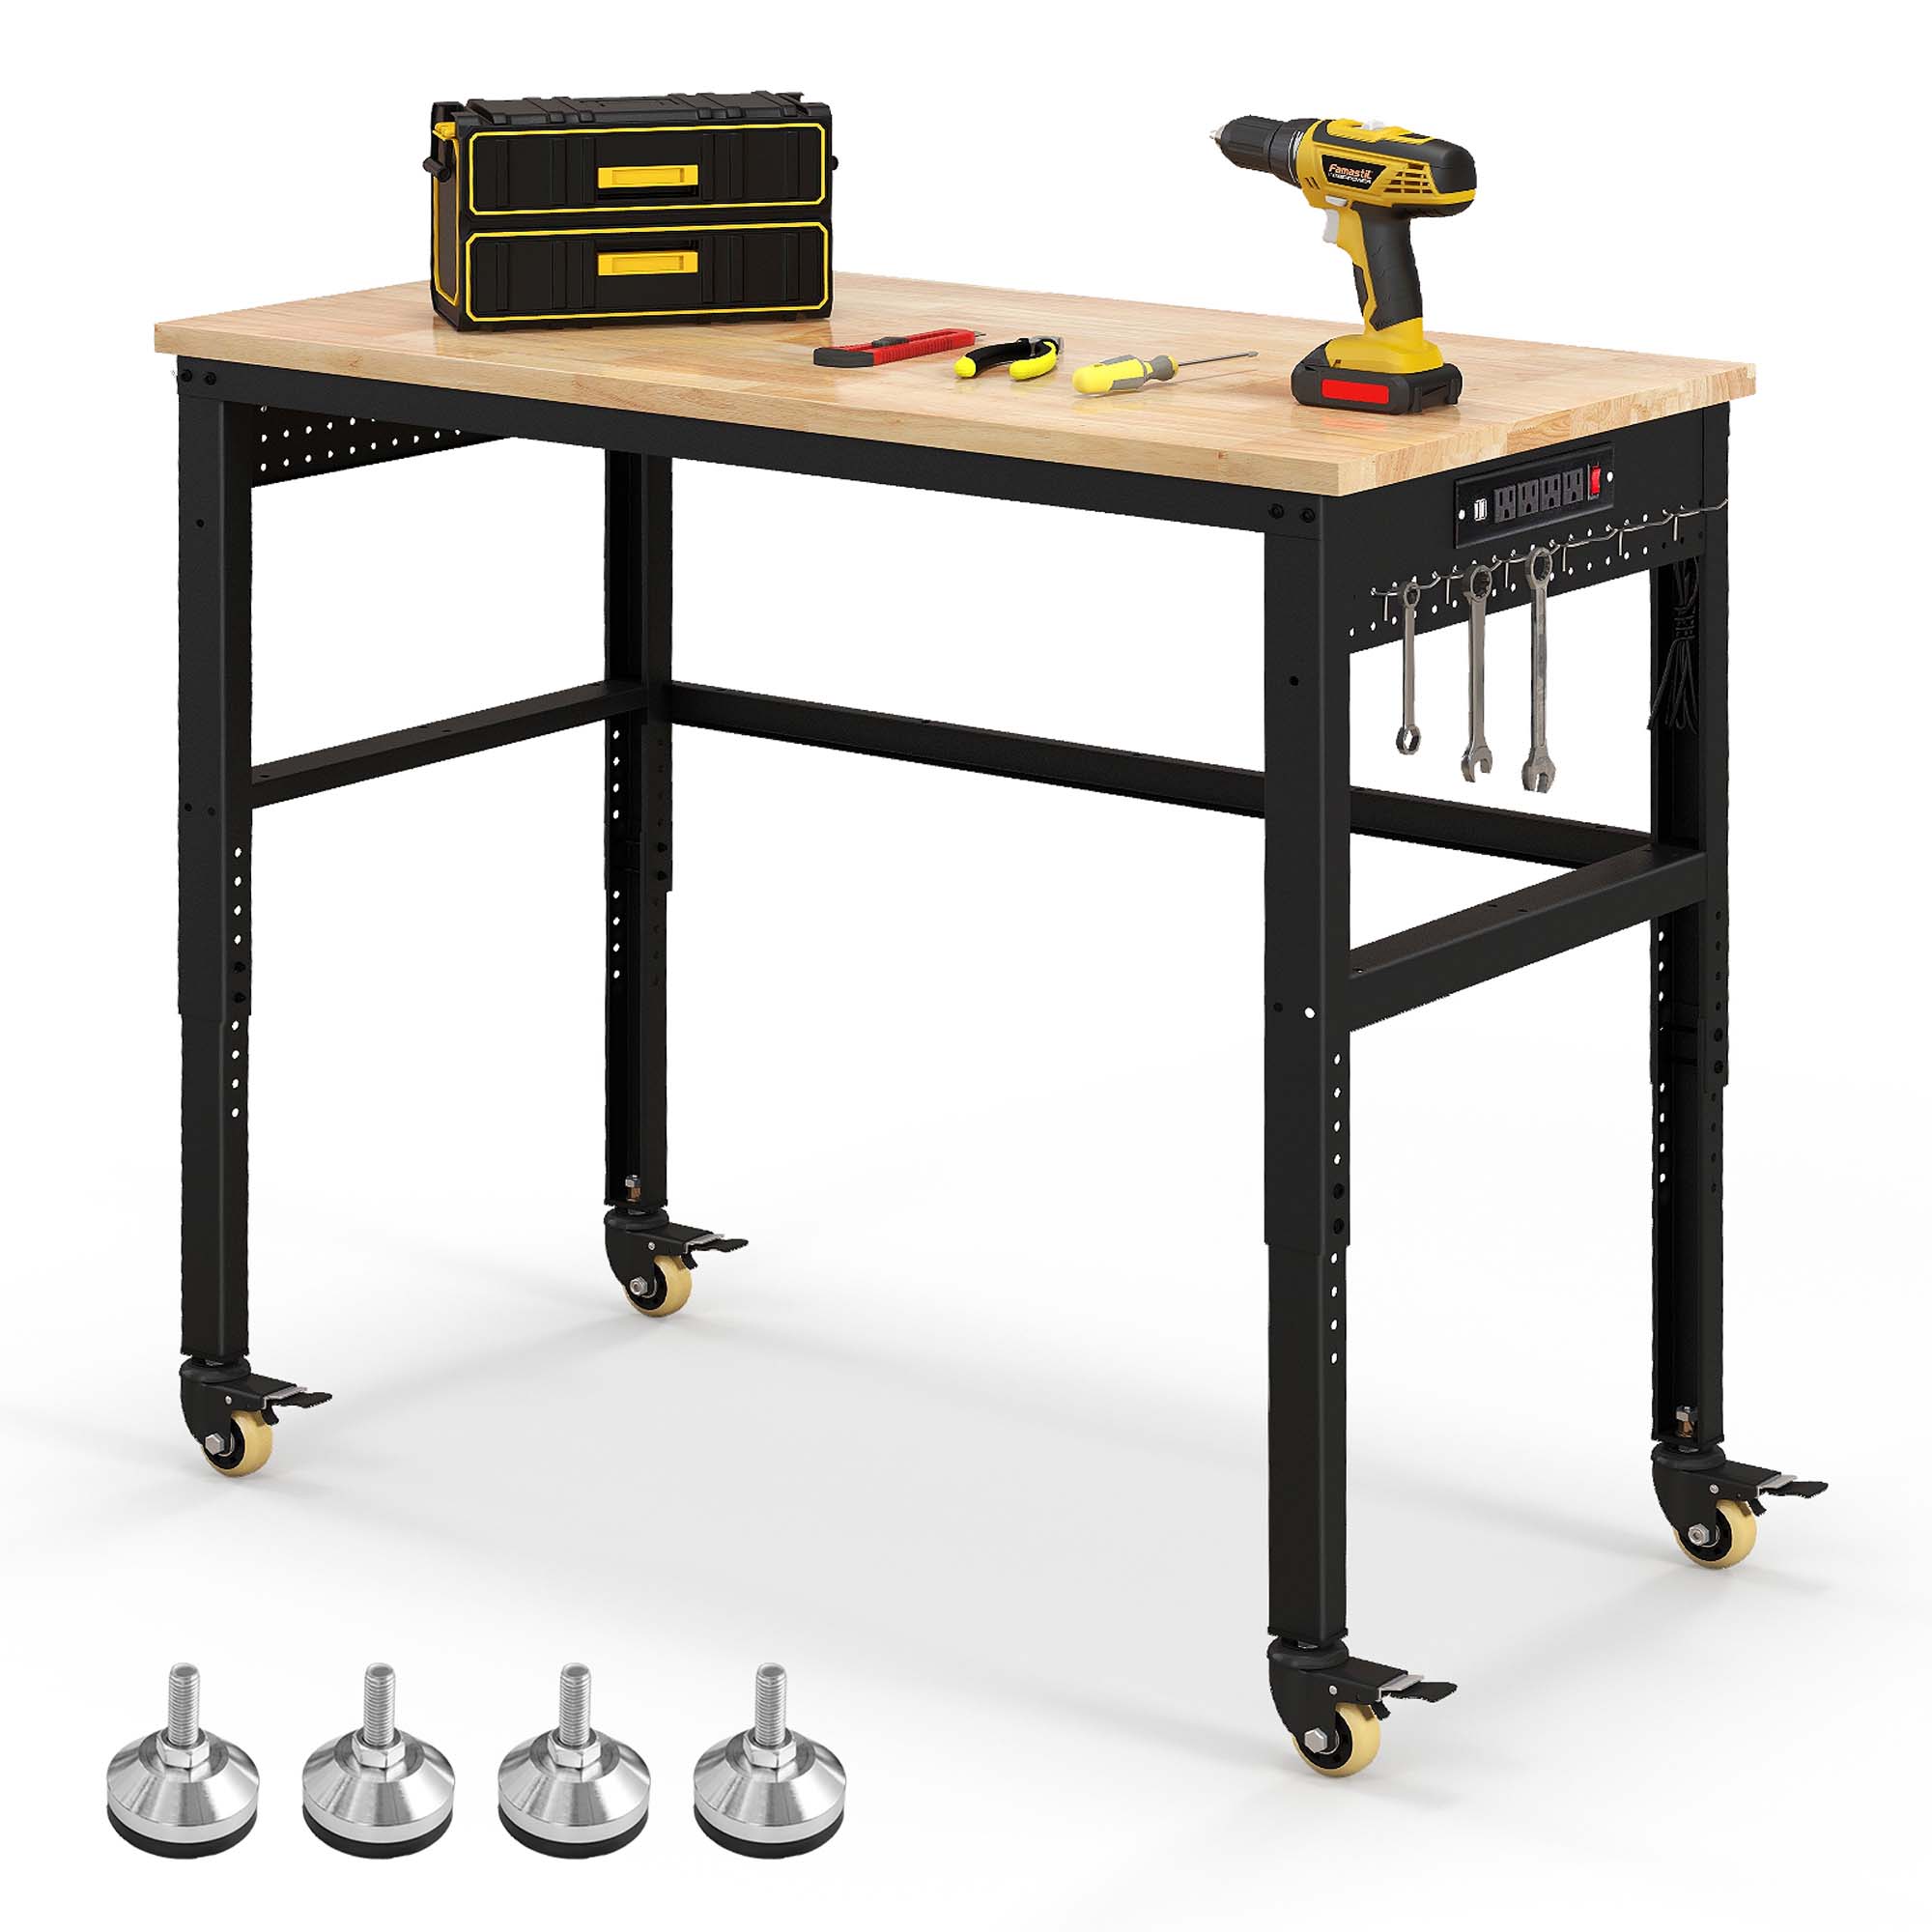 Costway 48" Adjustable Work Bench Heavy-Duty Steel Frame Worktable with Power Outlets